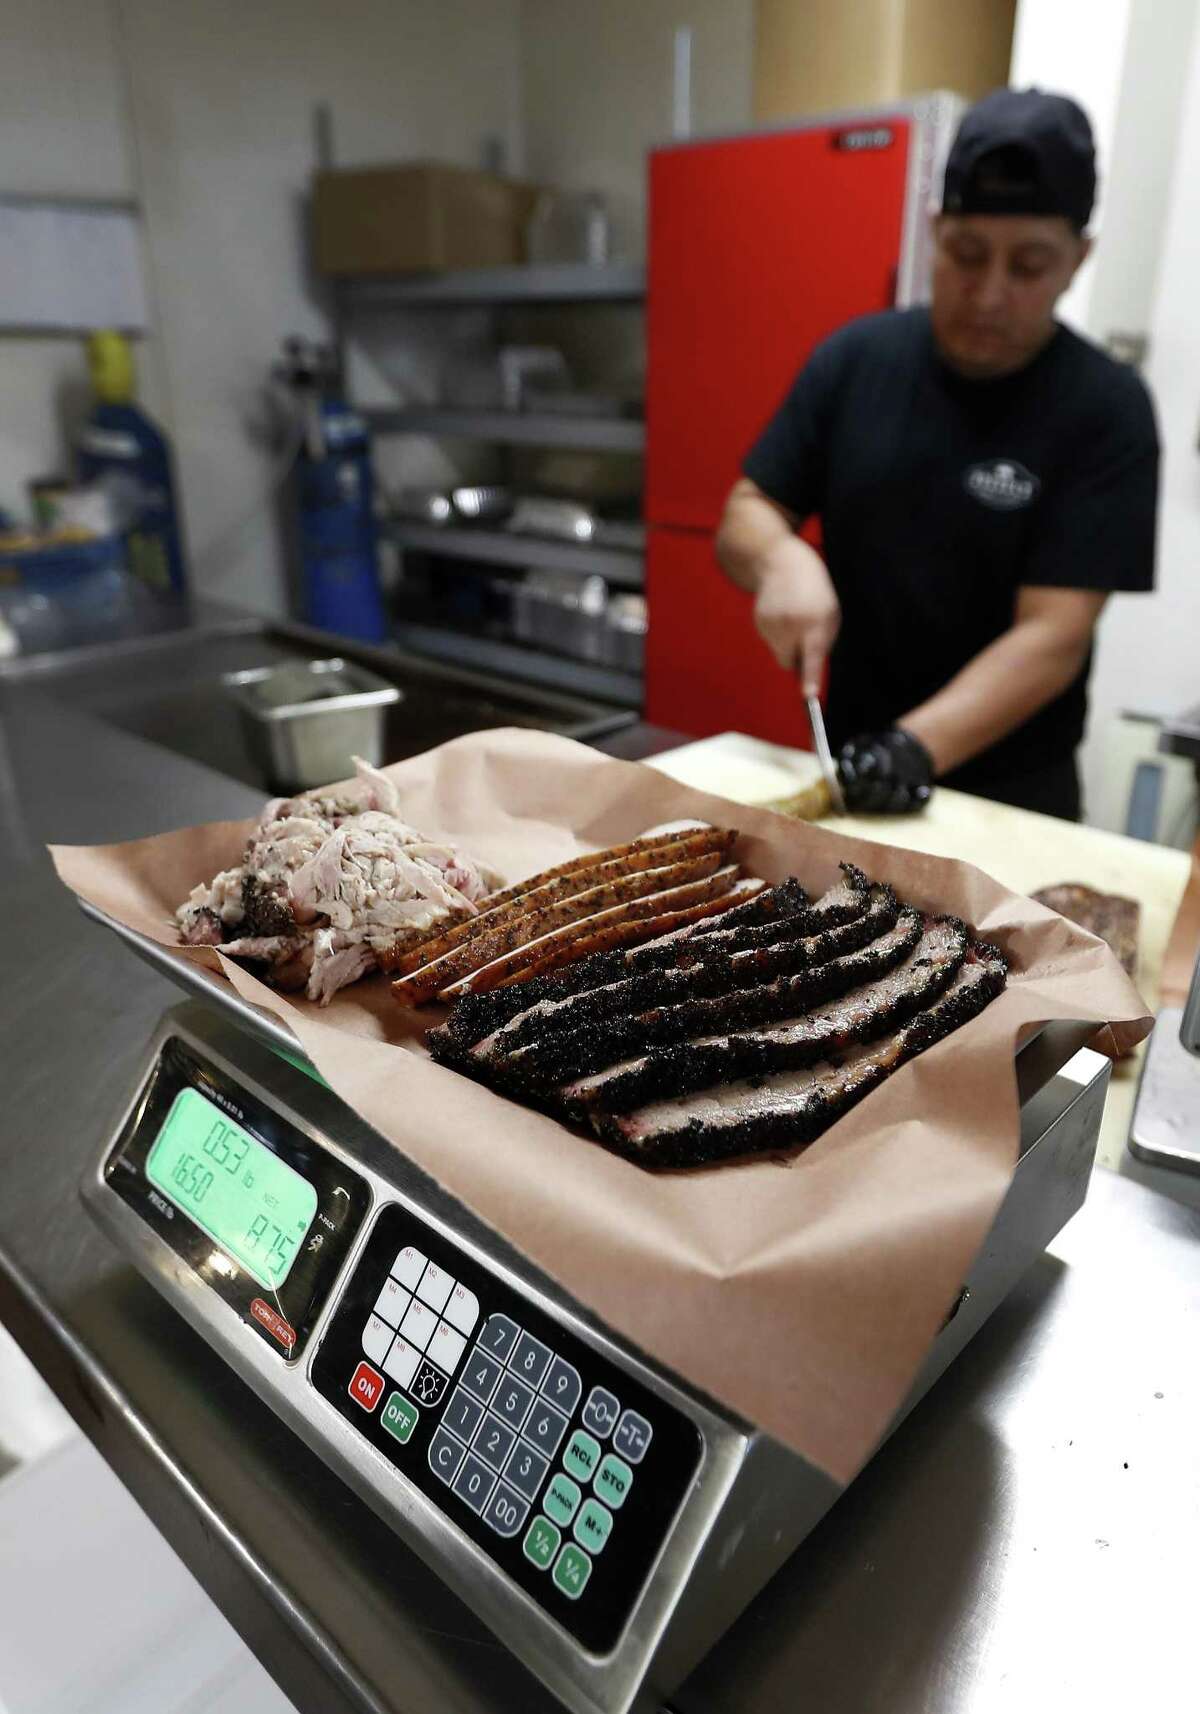 Russell Roegels of Roegels Barbecue Company, weighs meat on a scale behind the cash register, after Gudiel Tumax cuts it, Saturday, June 30, 2018, in Houston. Agriculture Commissioner Sid Miller has waged a war on BBQ joints, fining them for failing to follow rules the attorney general has said wont hold up in court. ( Karen Warren / Houston Chronicle )